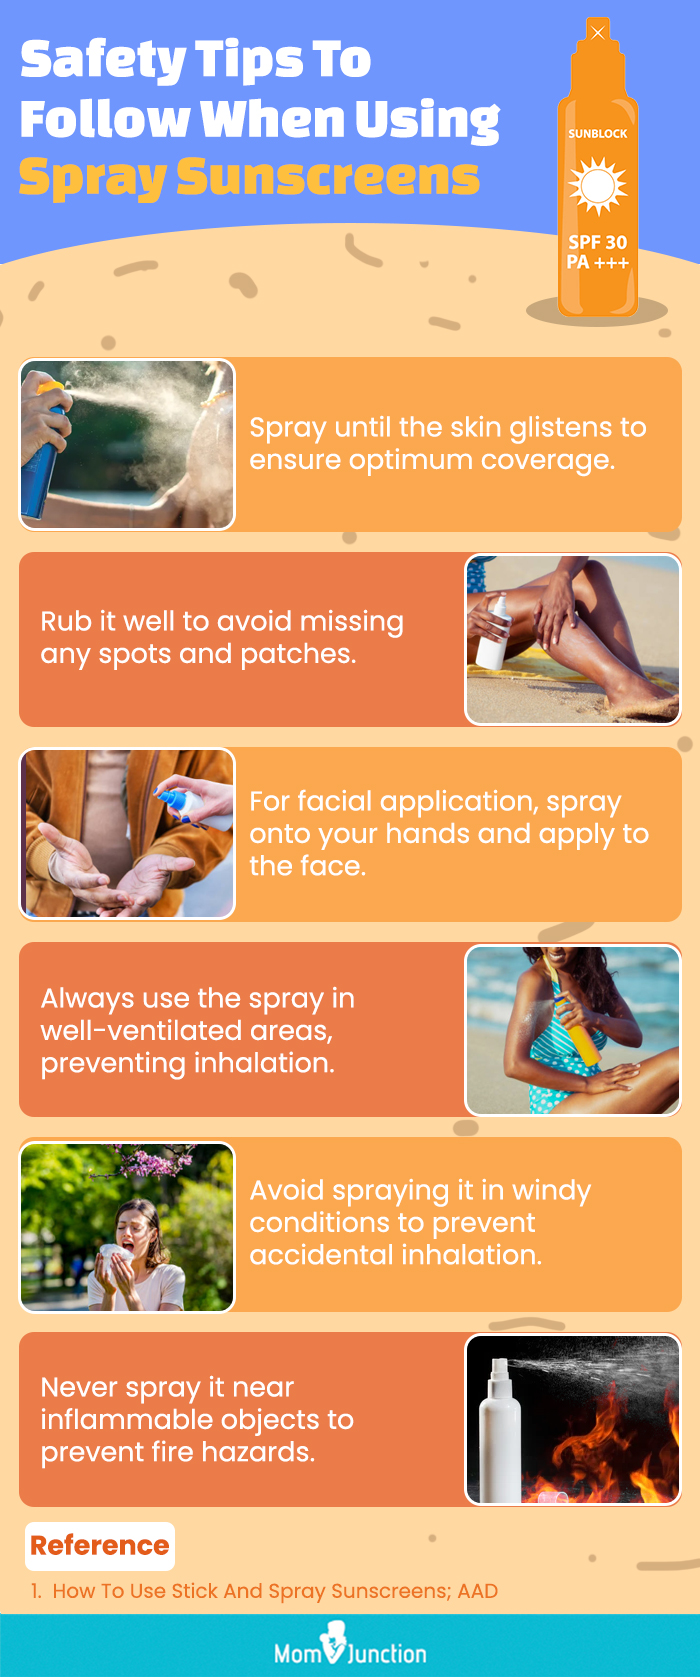 Safety Tips To Follow When Using Spray Sunscreens (infographic)